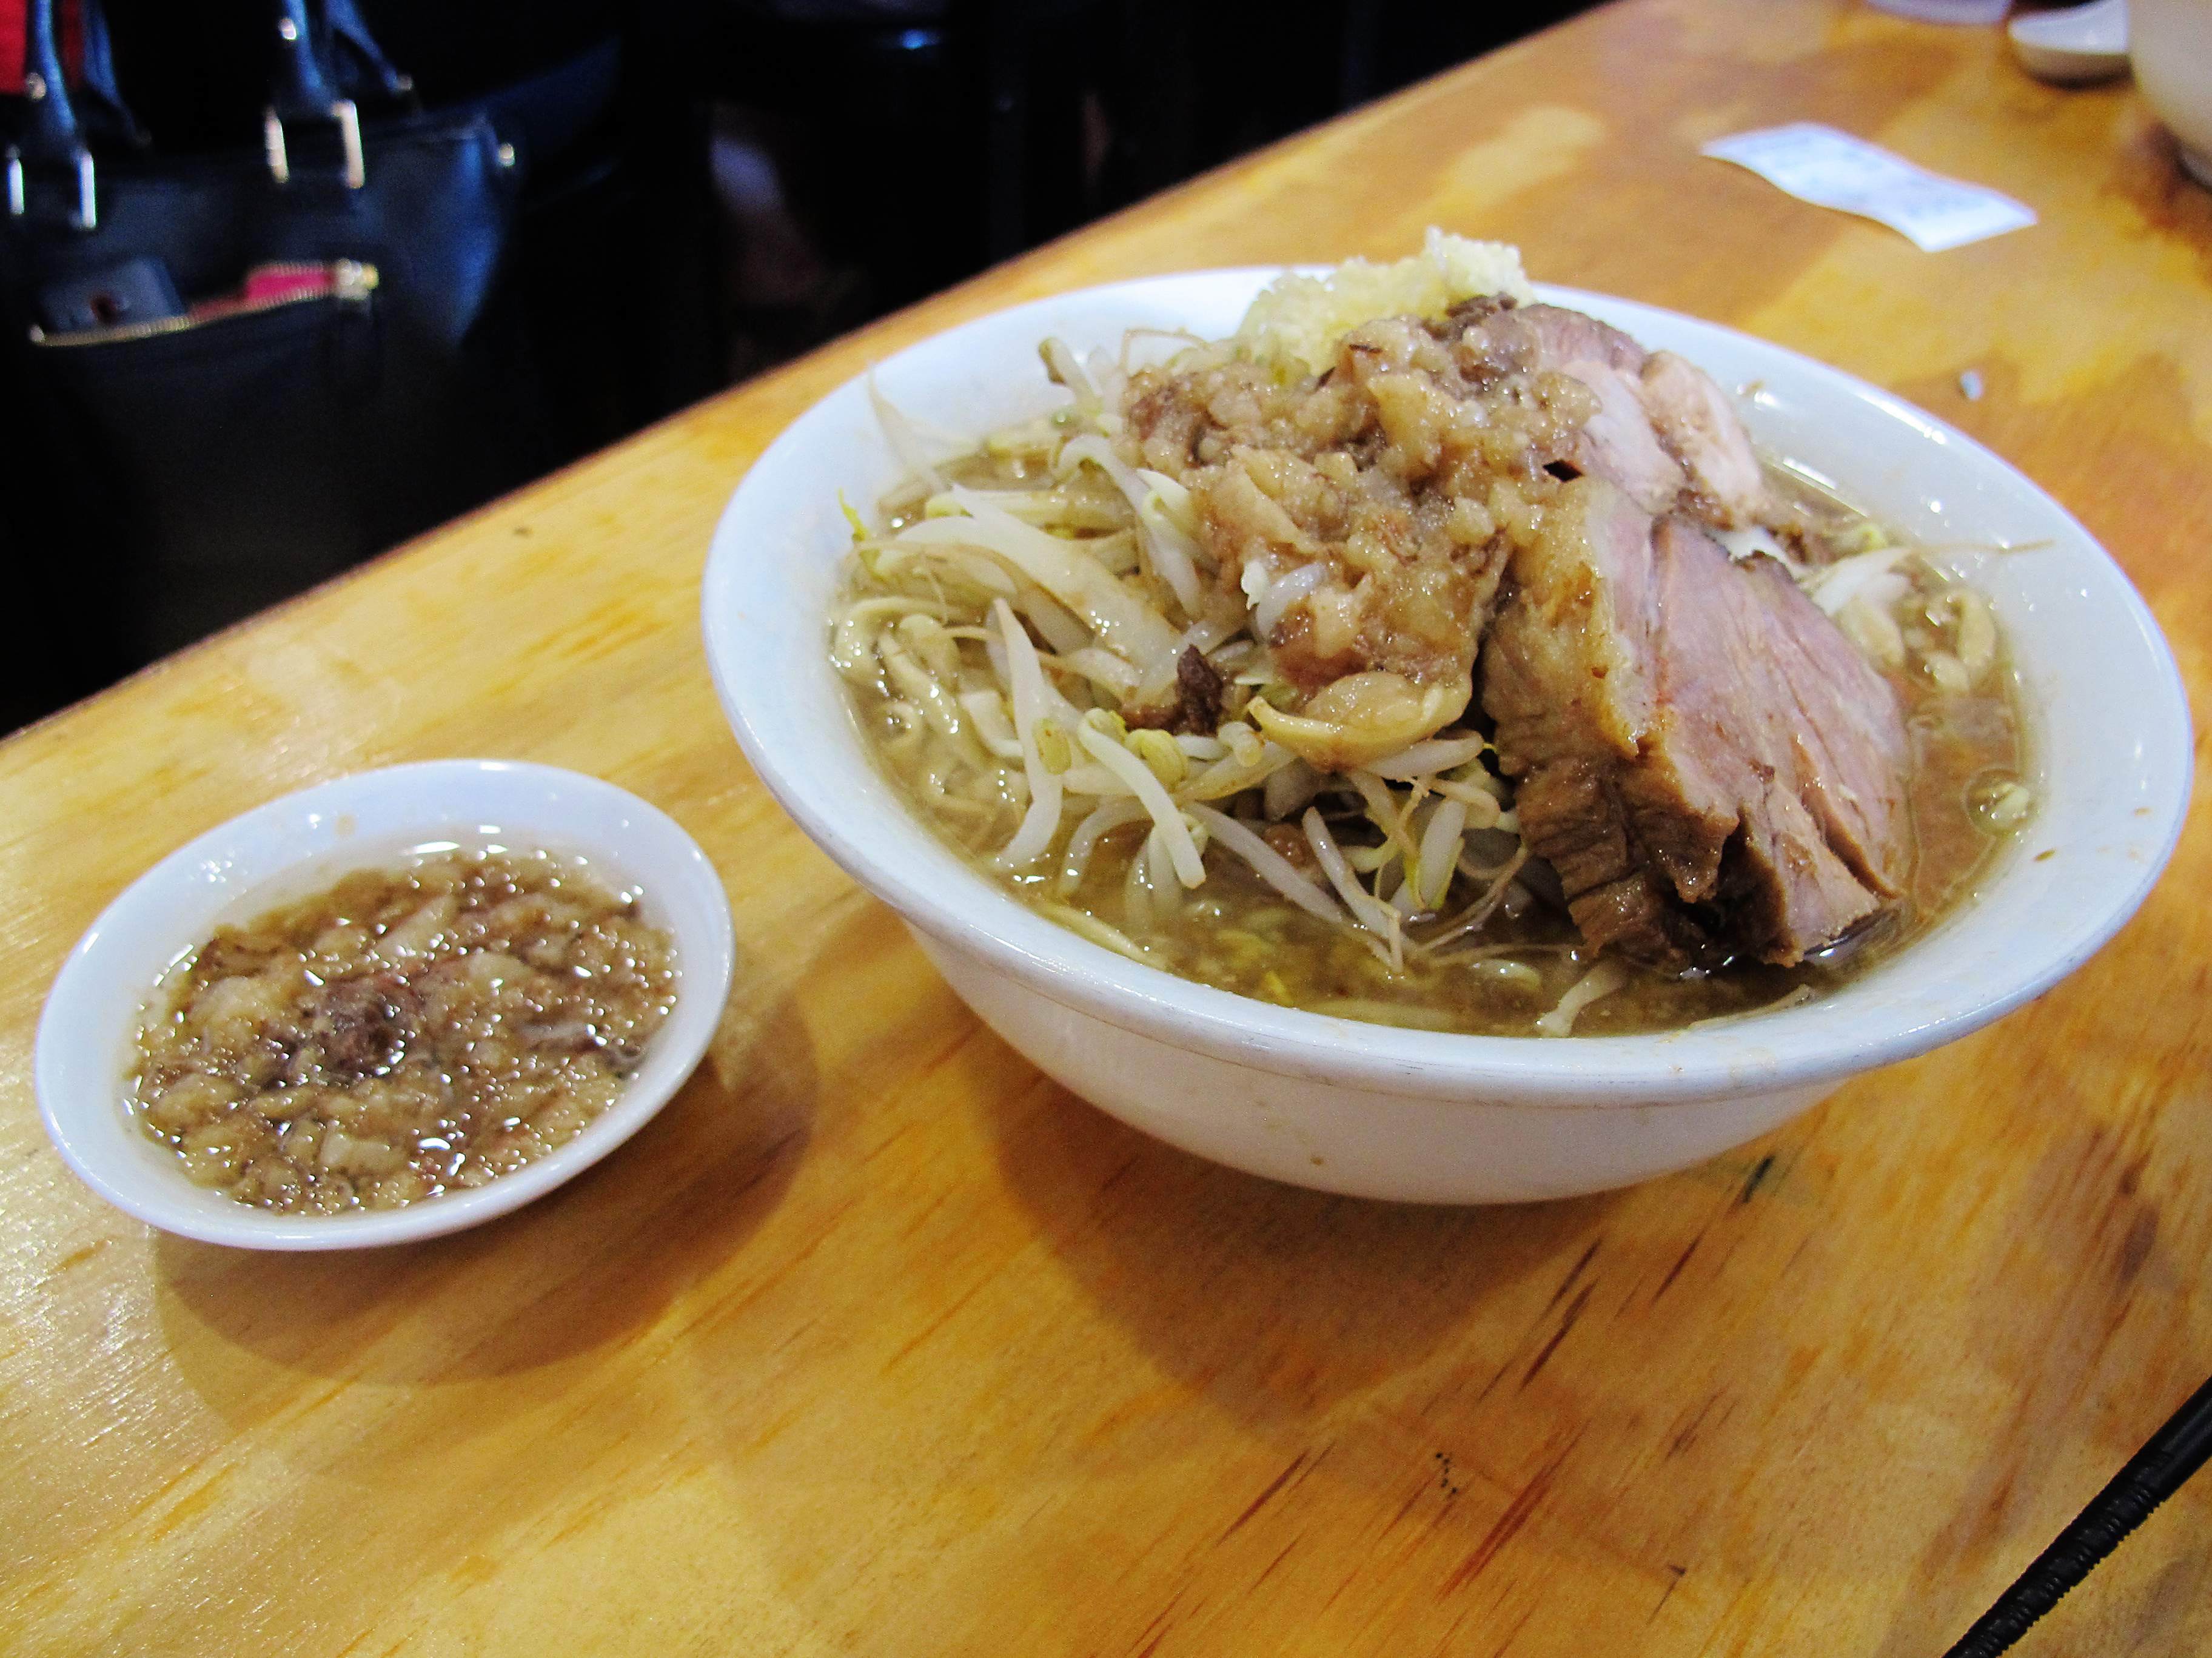 There are two choices at Yume Wo Katare: ramen topped with pork ($12), or ramen topped with more pork ($14). Extra garlic and fat can be added, too. Photo: Andrea Shea for WBUR